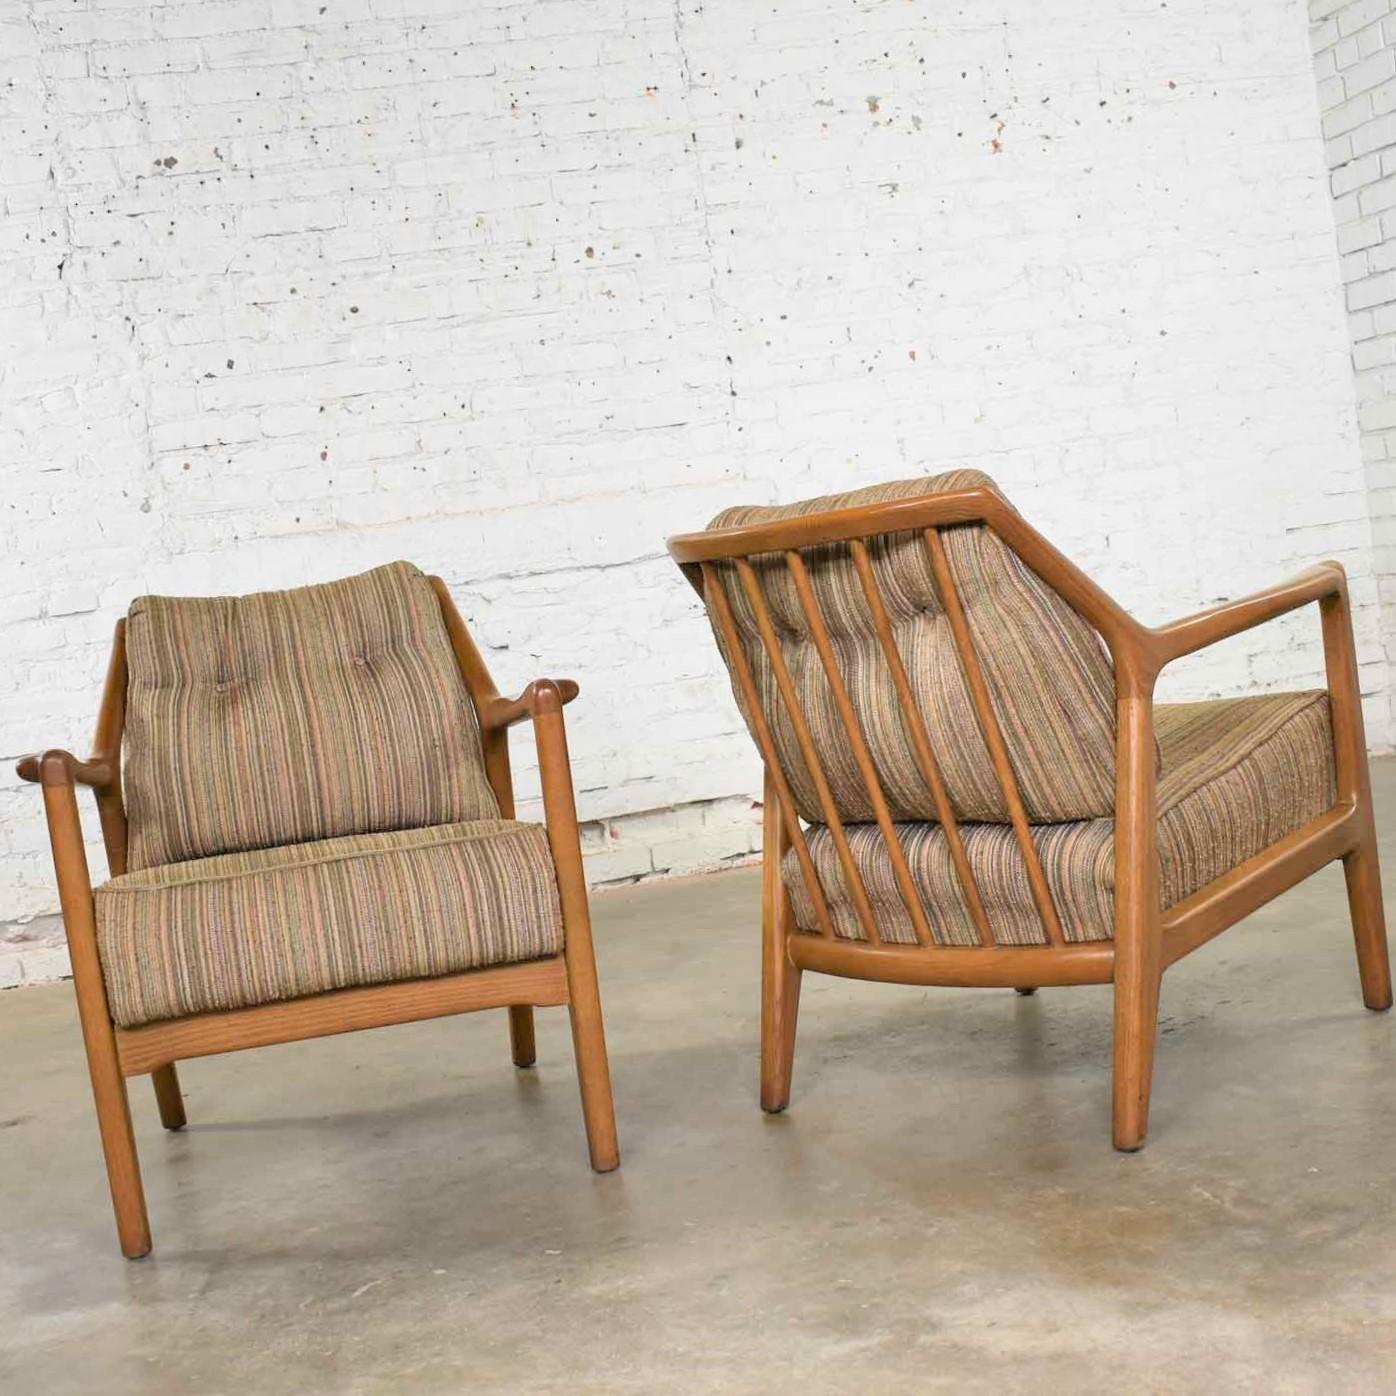 Handsome pair of Mid-Century Modern spindle back lounge club chairs by Jack Van der Molen for the Ash Group by Jamestown Lounge Company. In fact, these are No. 672 chairs. They wear their original fabric and tobacco finish which are in fabulous